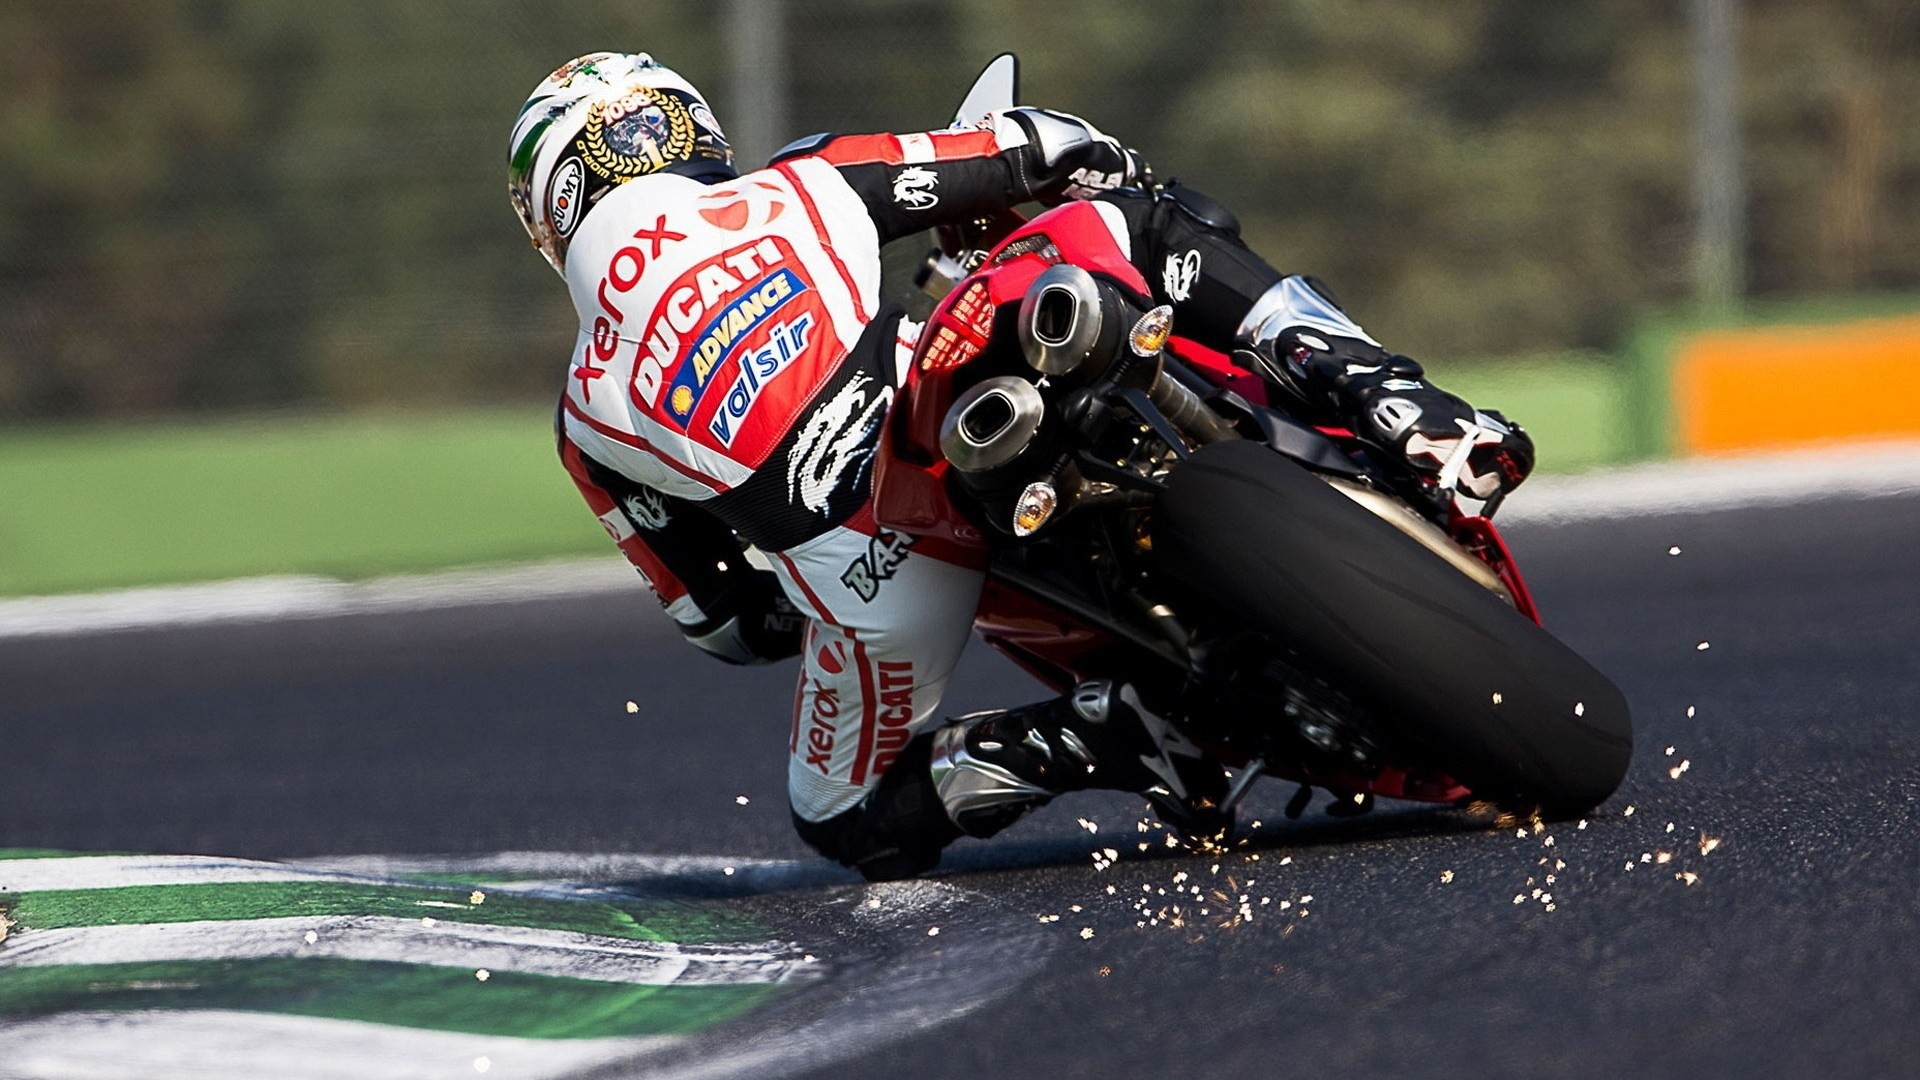 A sharp turn on a motorcycle wallpapers and images - wallpapers ...